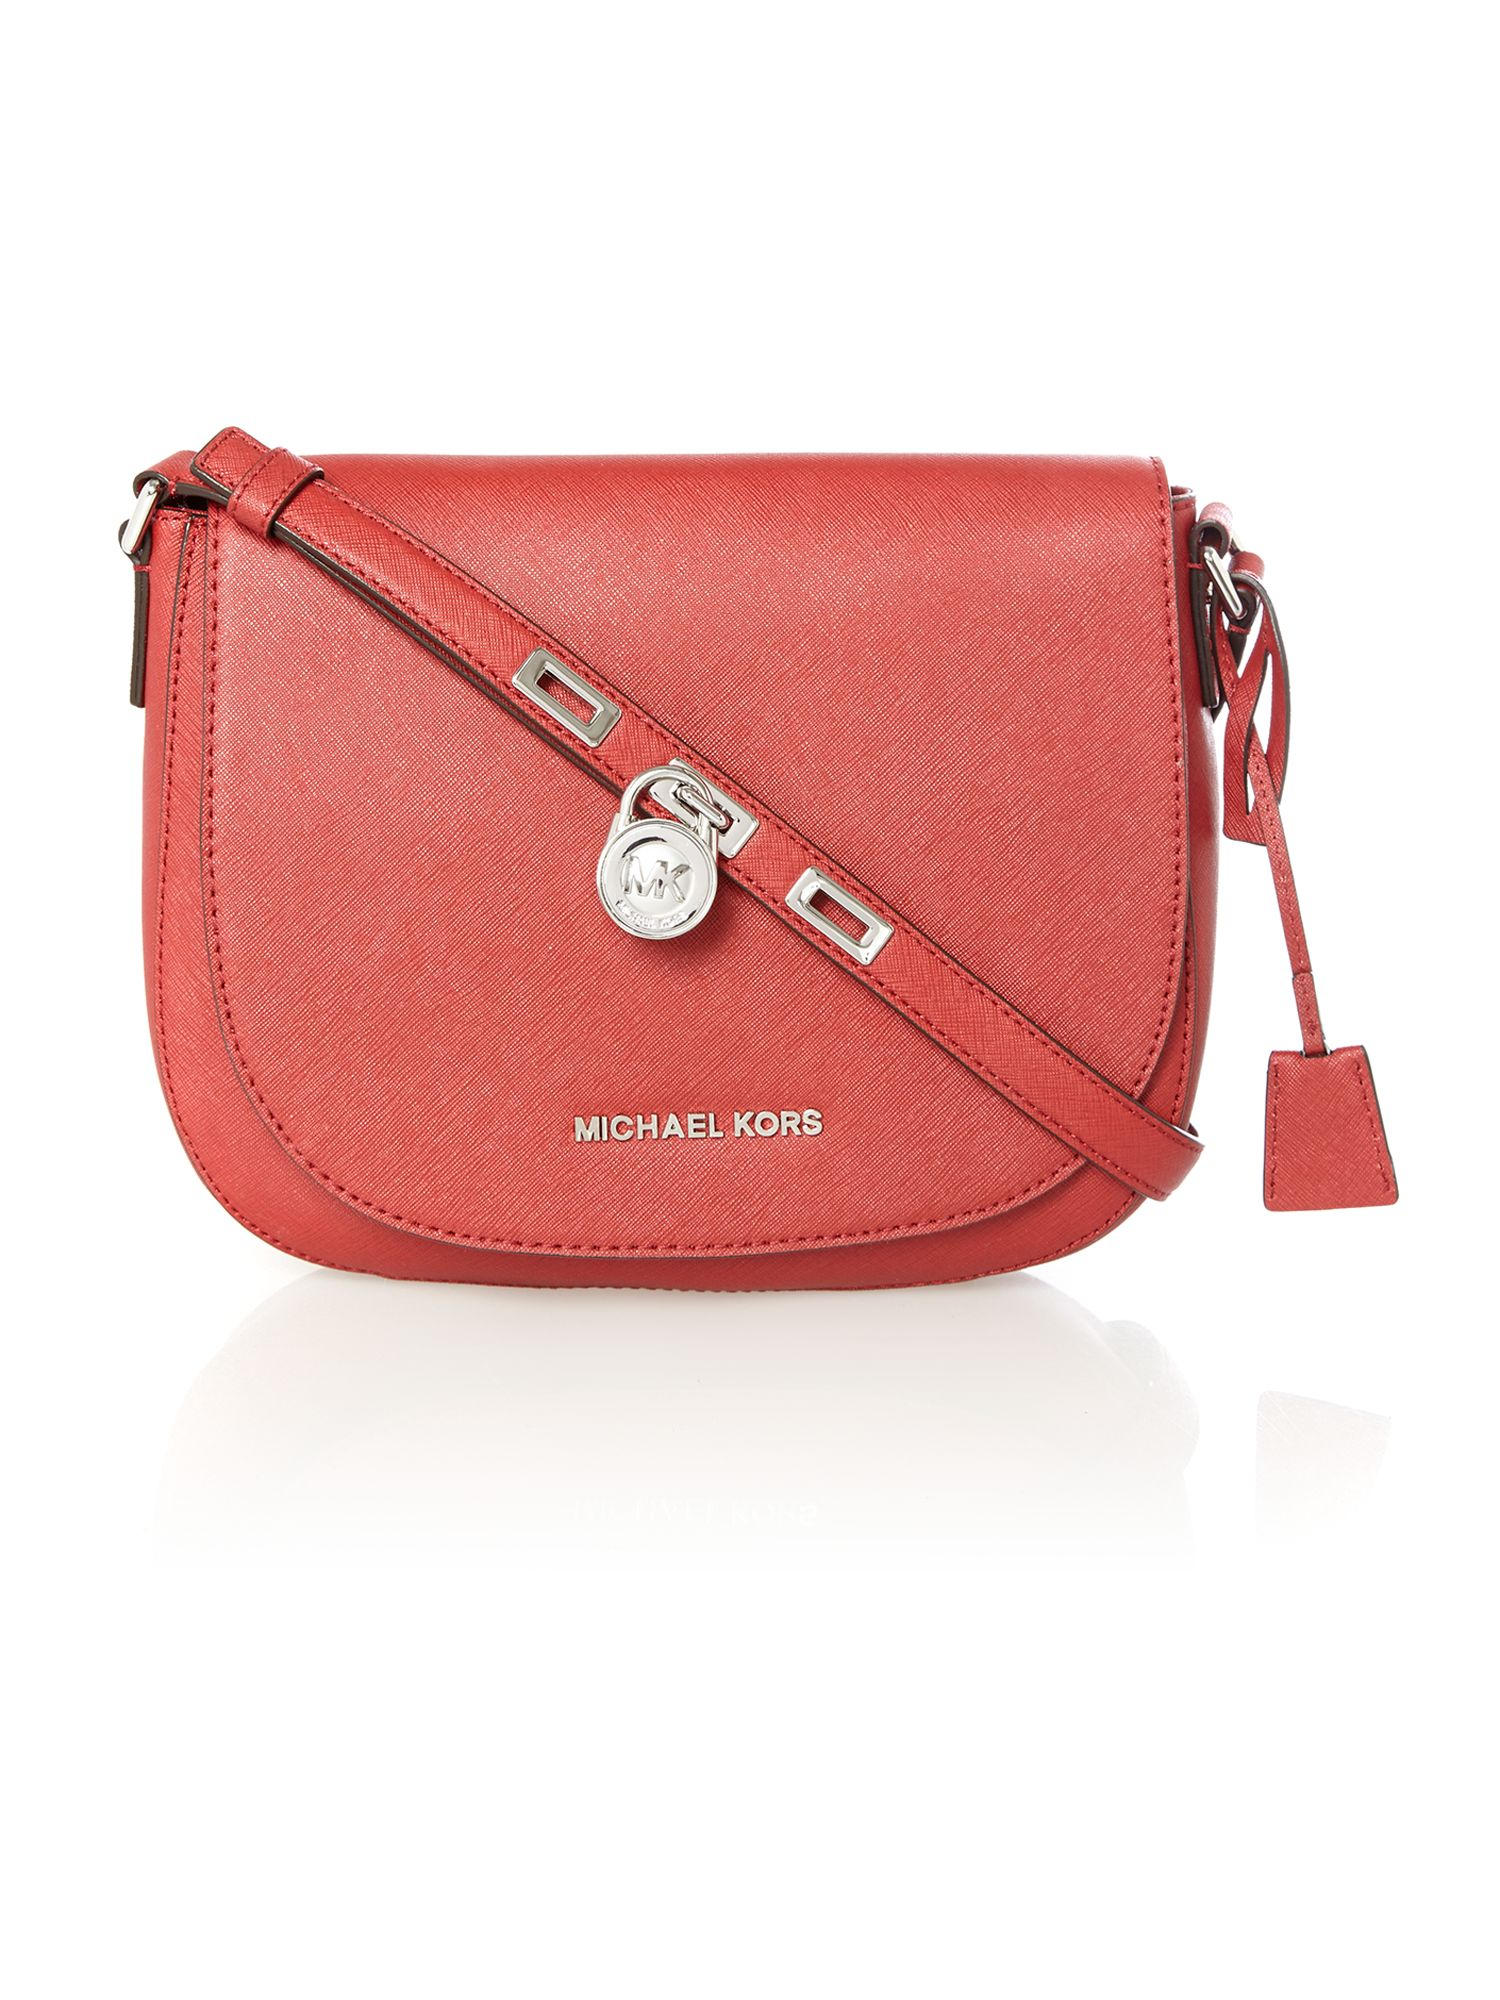 Michael kors Hamiltin Red Flap Over Cross Body Bag in Red | Lyst